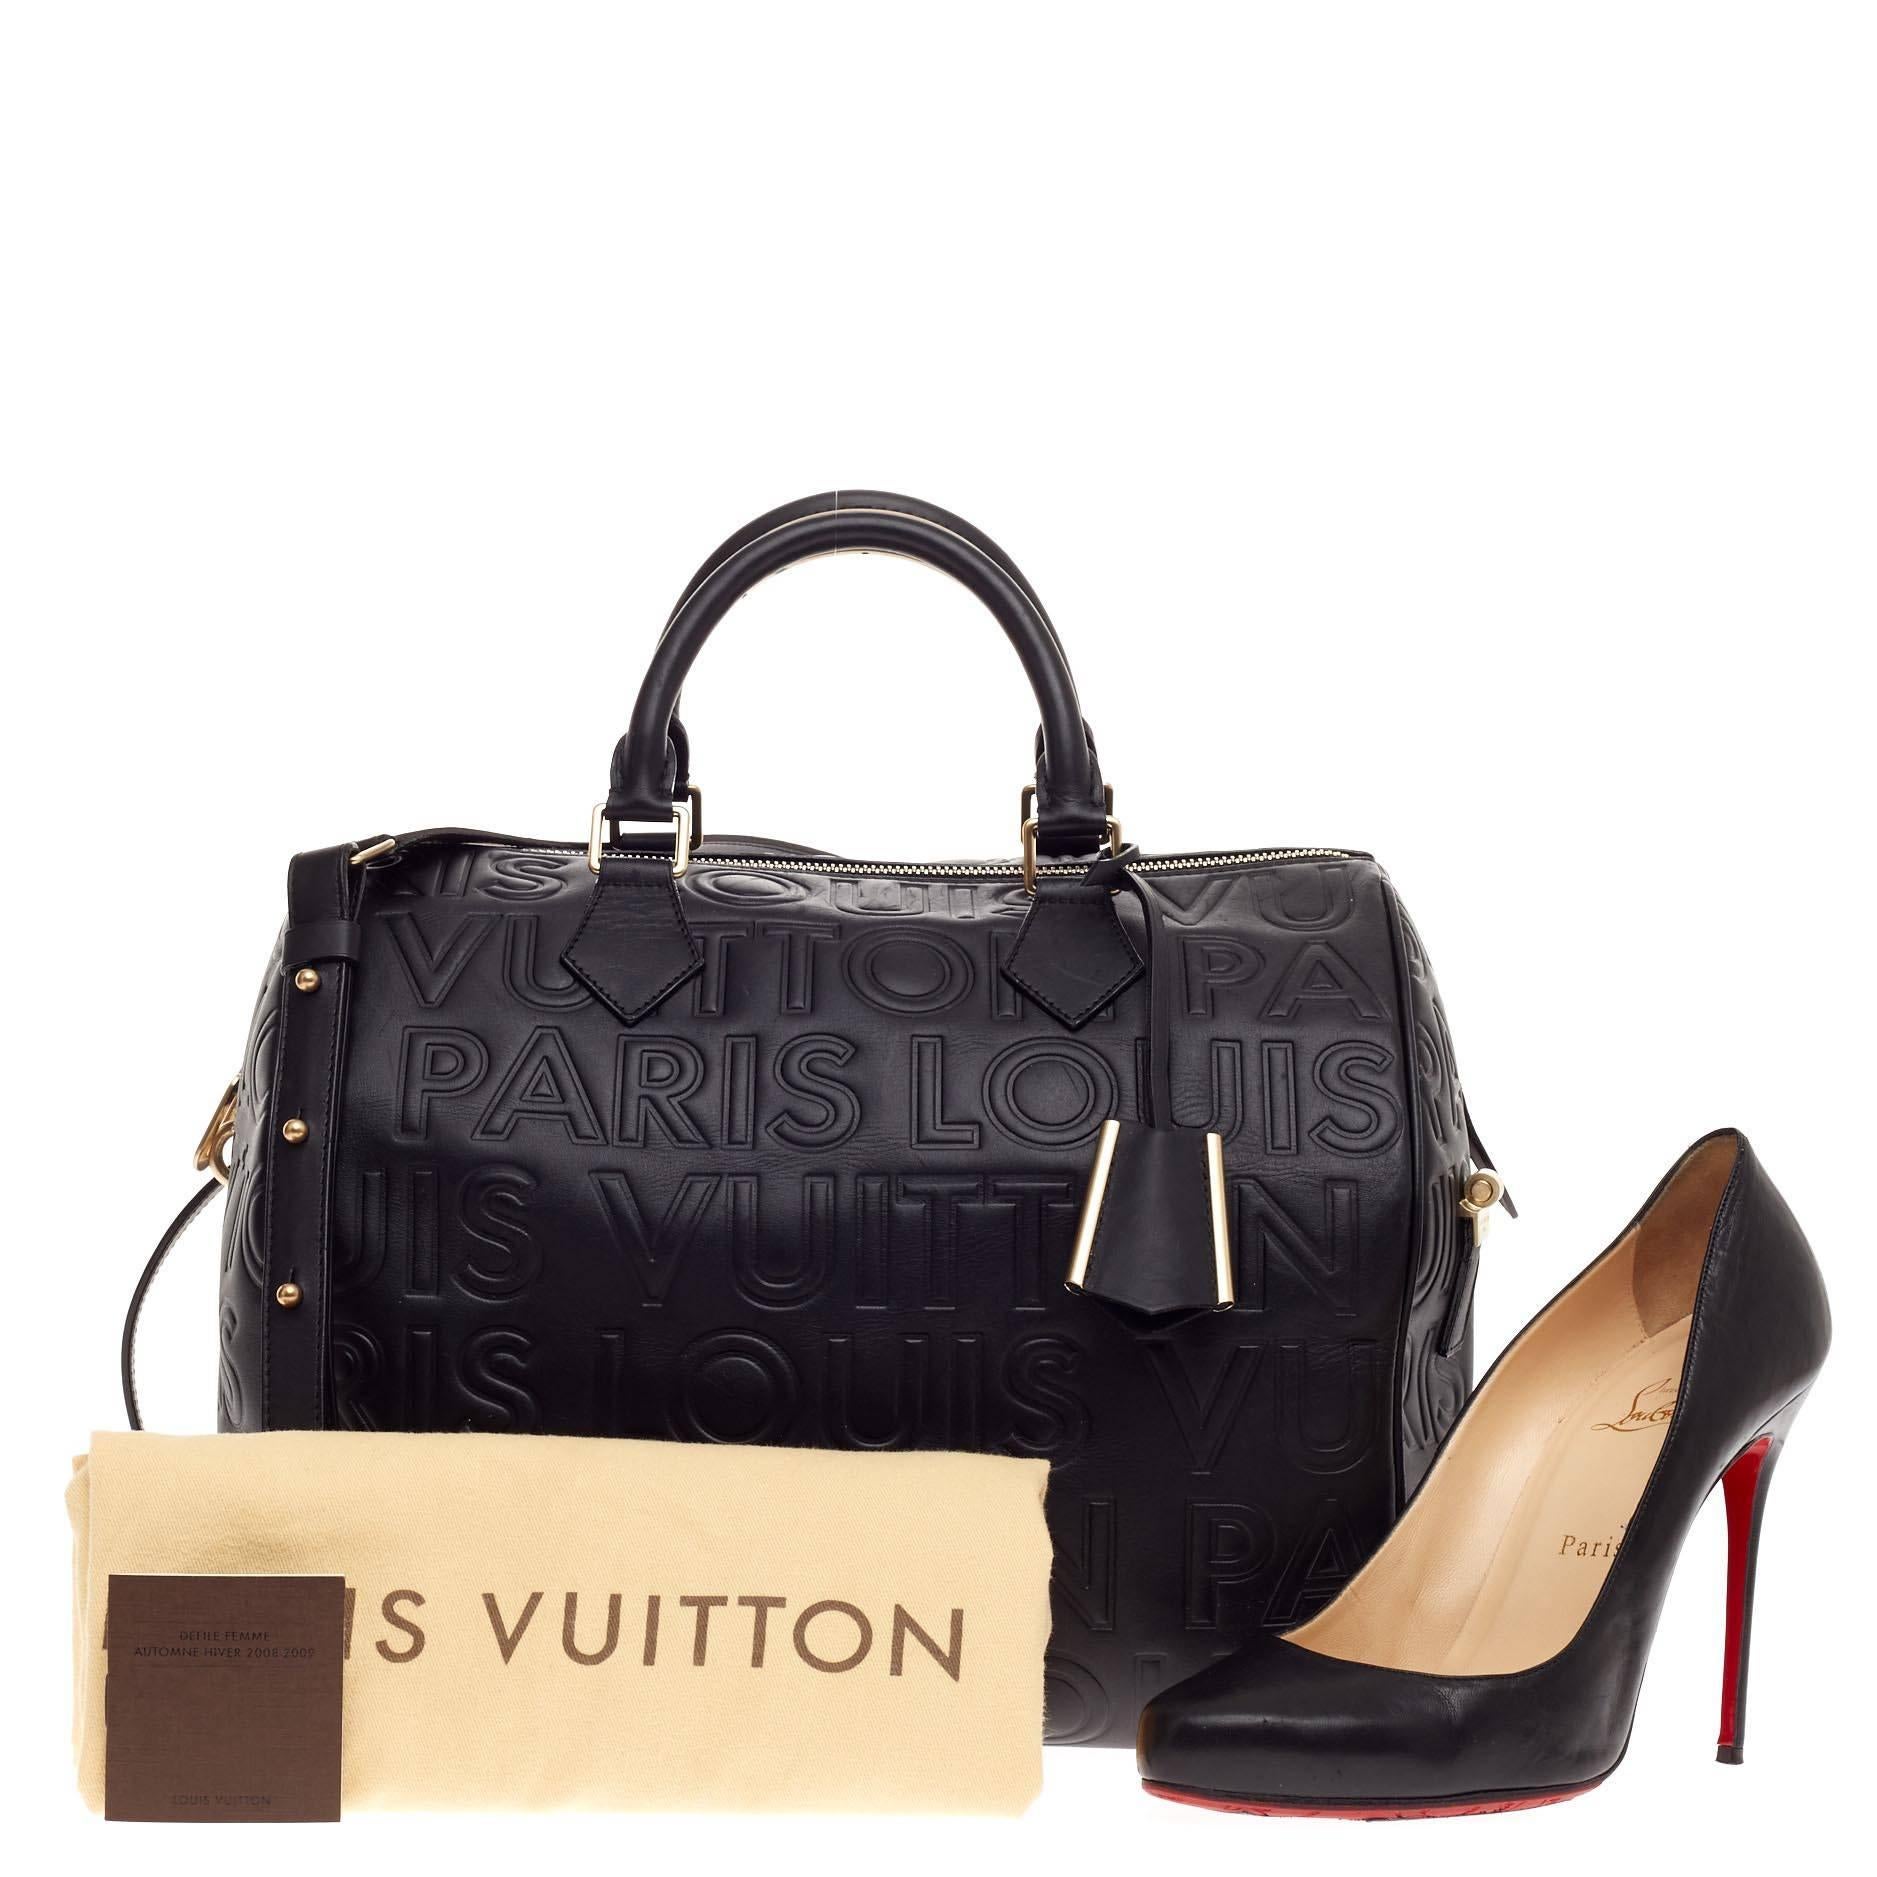 This authentic Louis Vuitton Paris Speedy Cube Embossed Leather 30 presented in the brand's Fall/Winter 2008 Collection updates the classic Speedy with a youthful, edgy style. Crafted from supple black leather, this Speedy features embossed Paris